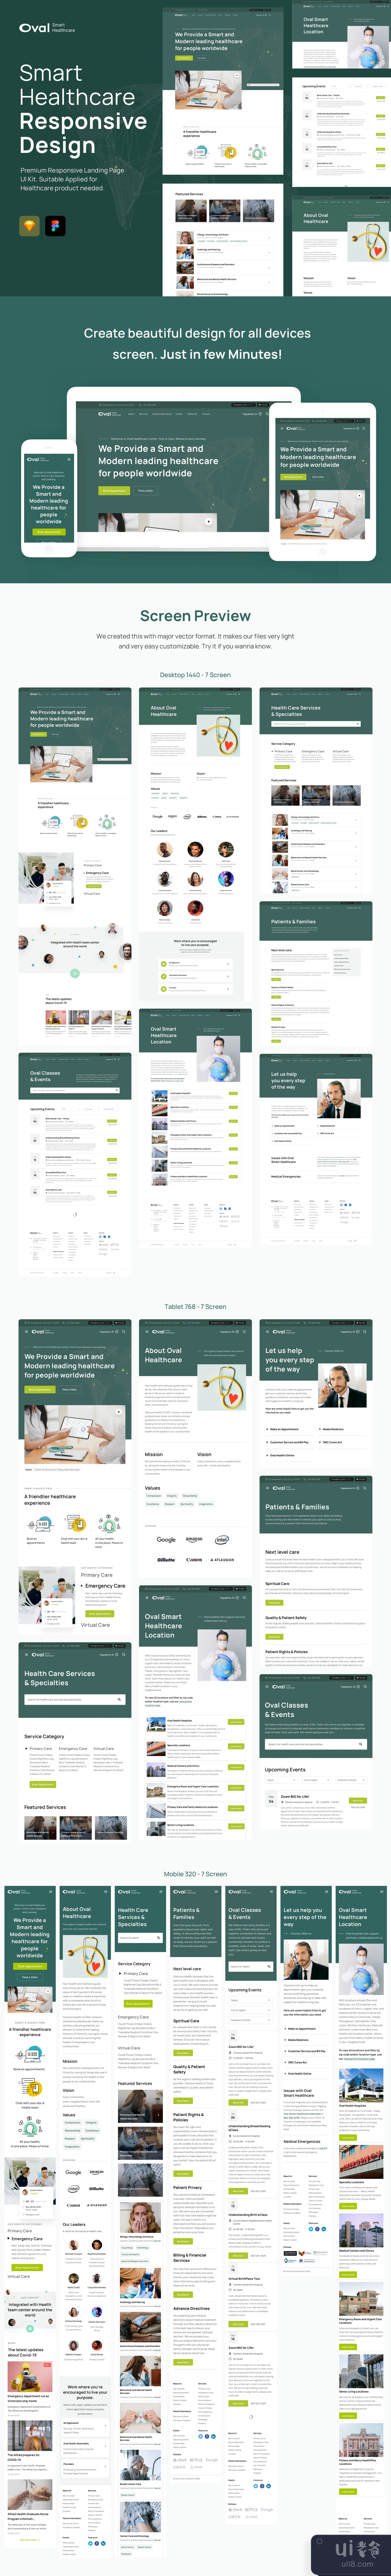 Oval Healthcare Landing Page Template (Oval Healthcare Landing Page Template)插图1